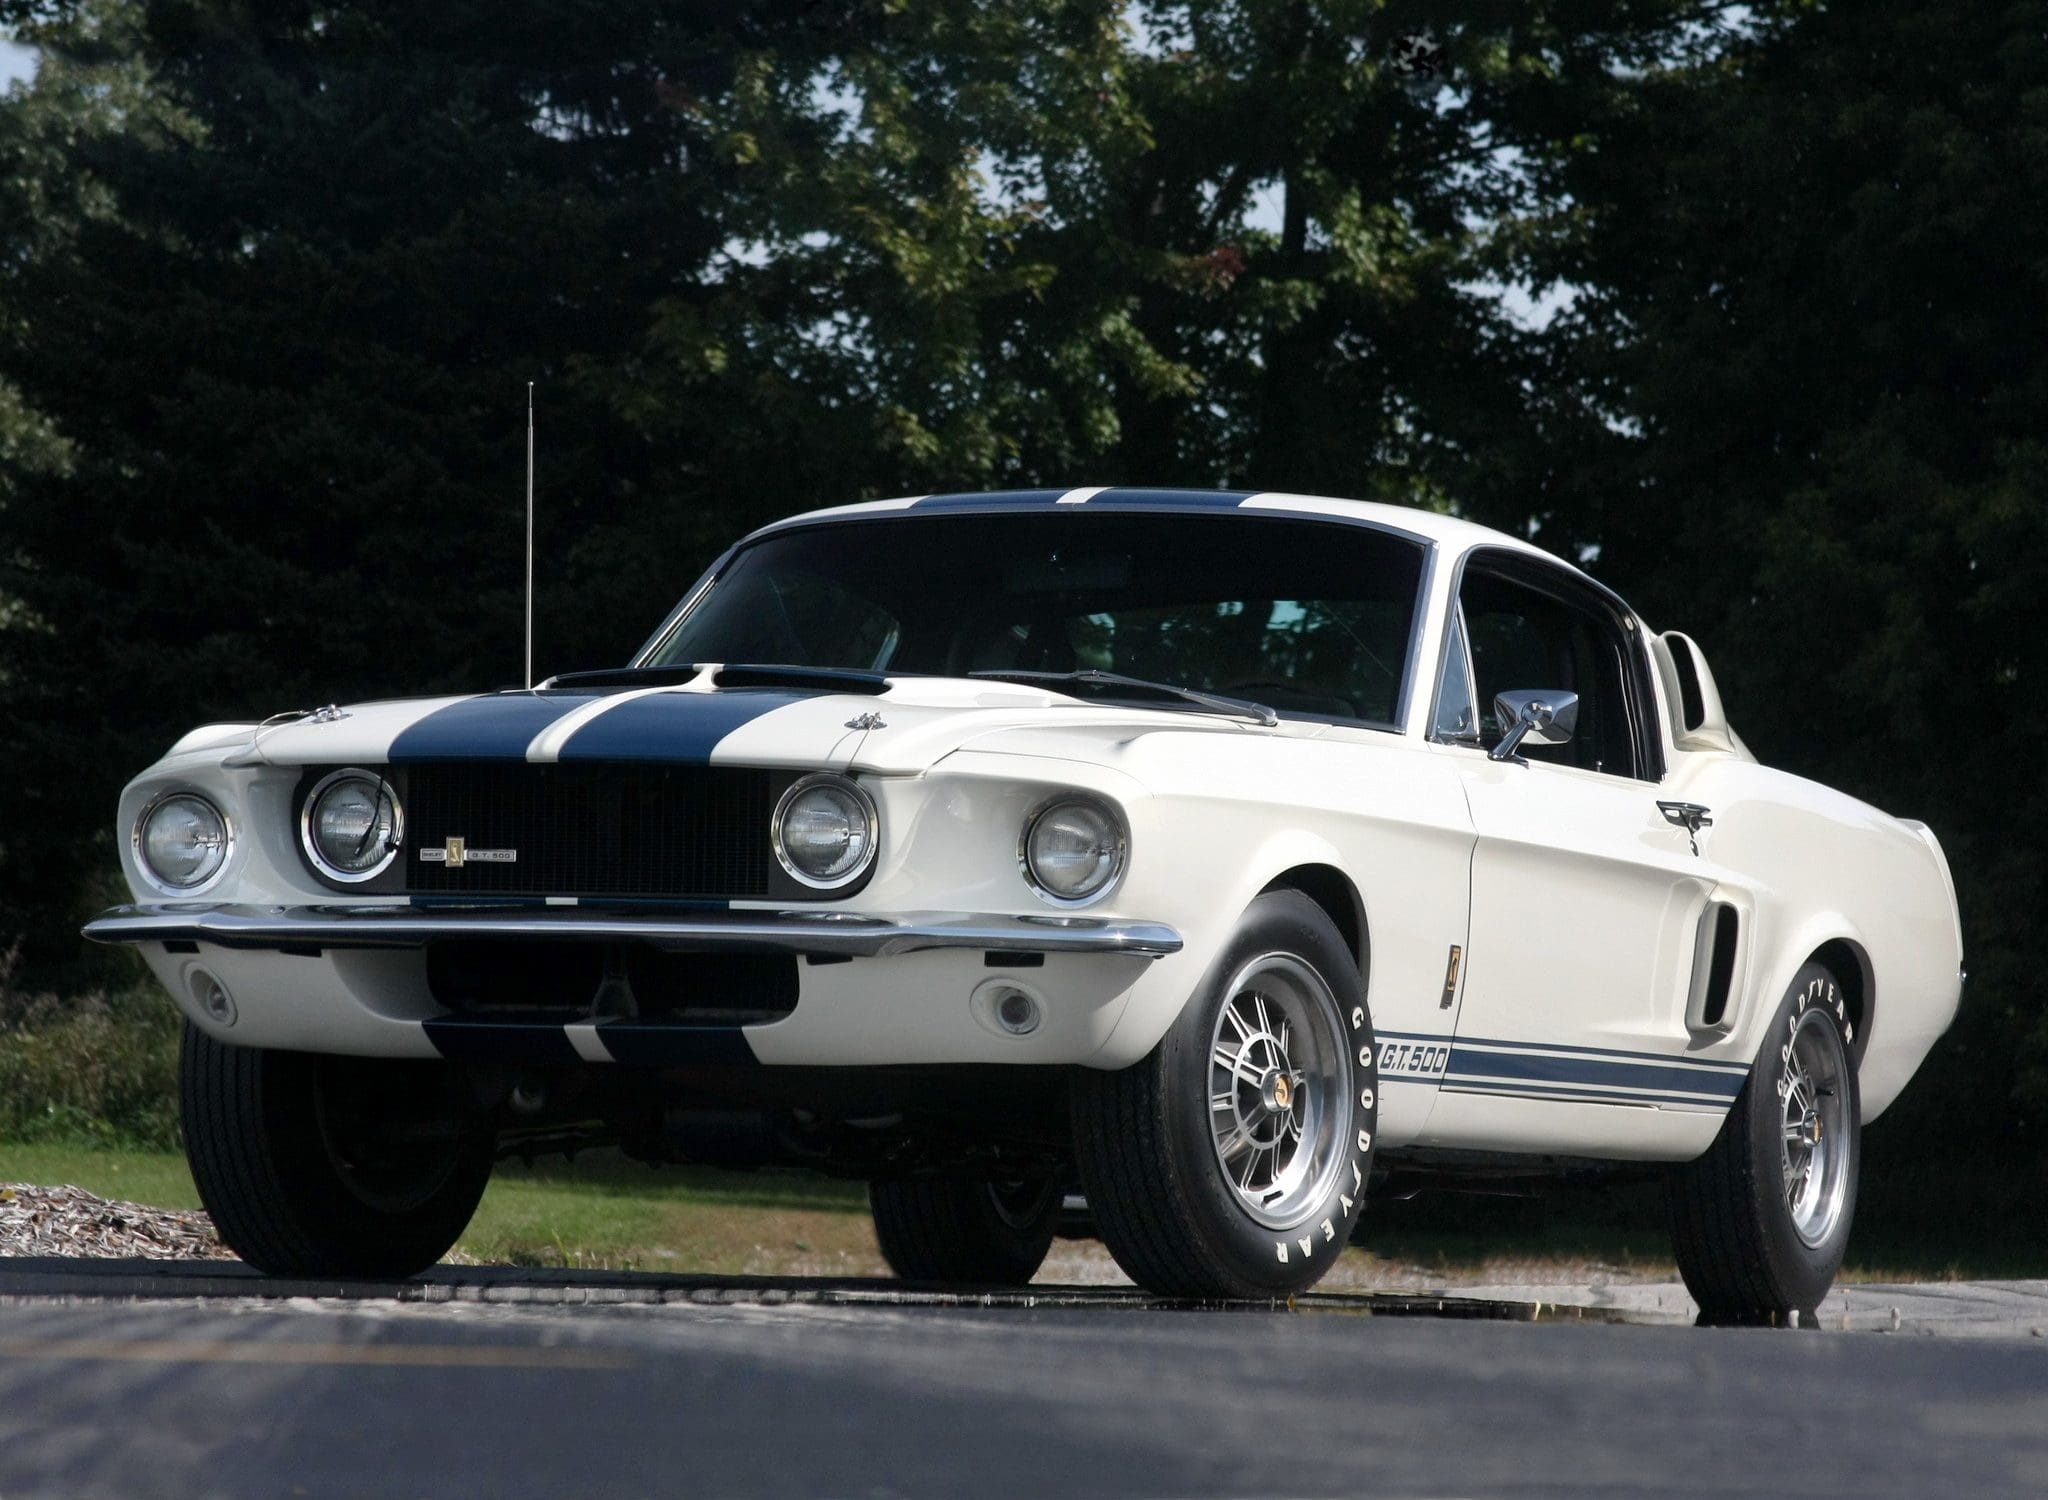 Mustang Of The Day: 1967 Ford Mustang Shelby GT500